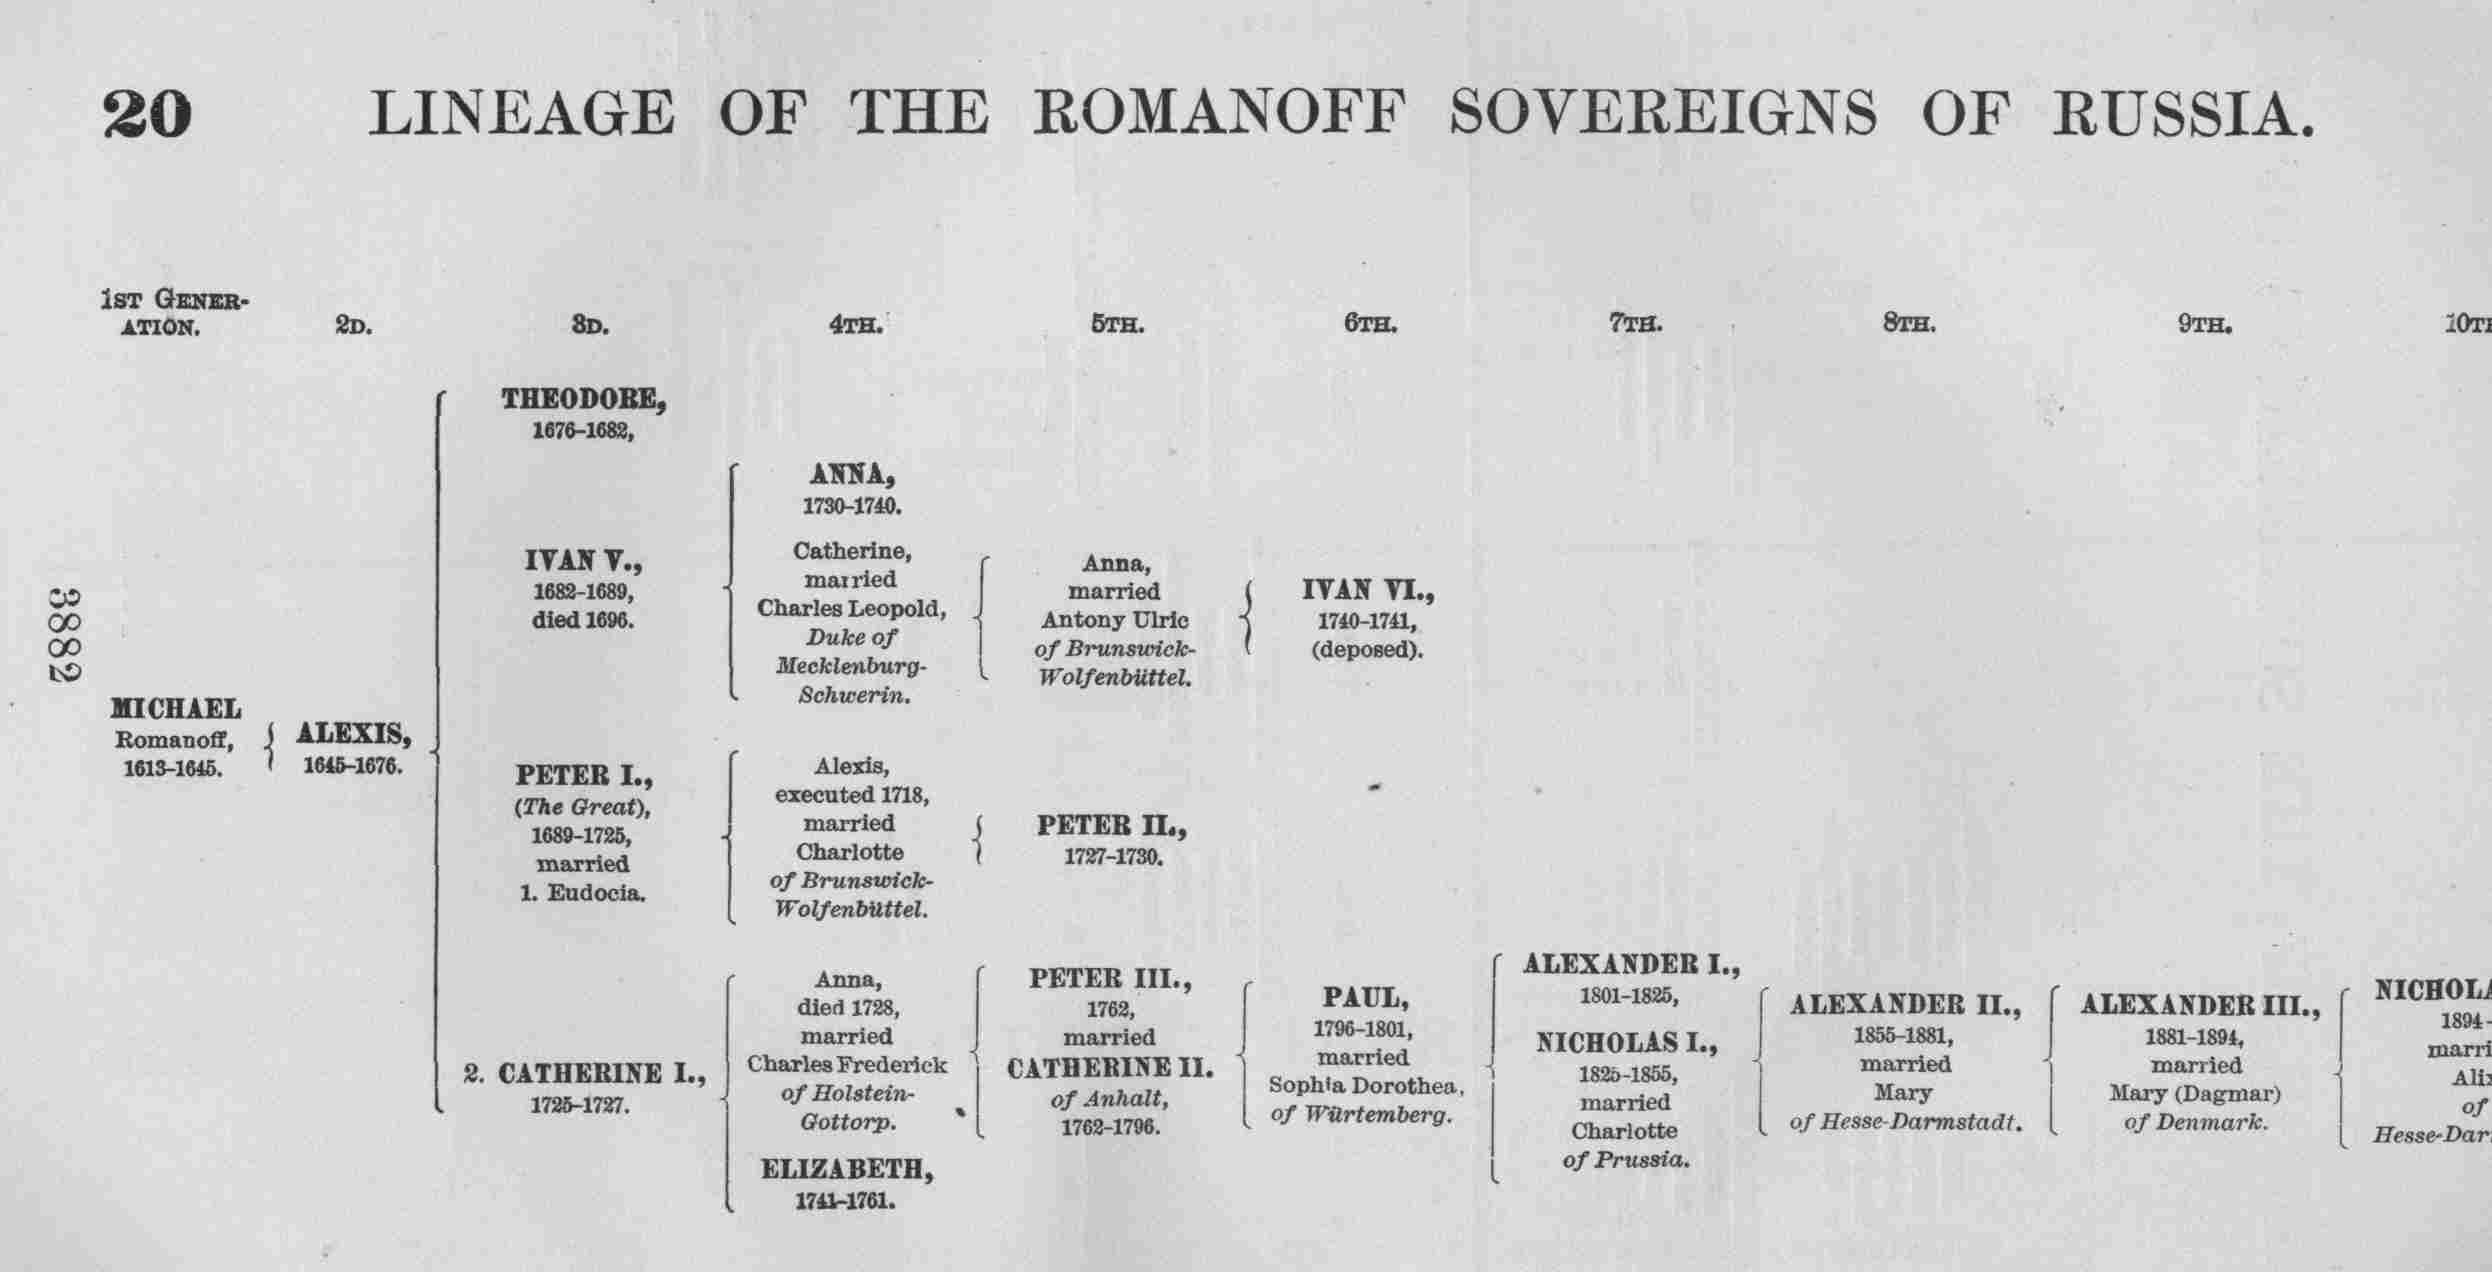 LINEAGE OF THE ROMANOFF SOVEREIGNS OF RUSSIA.